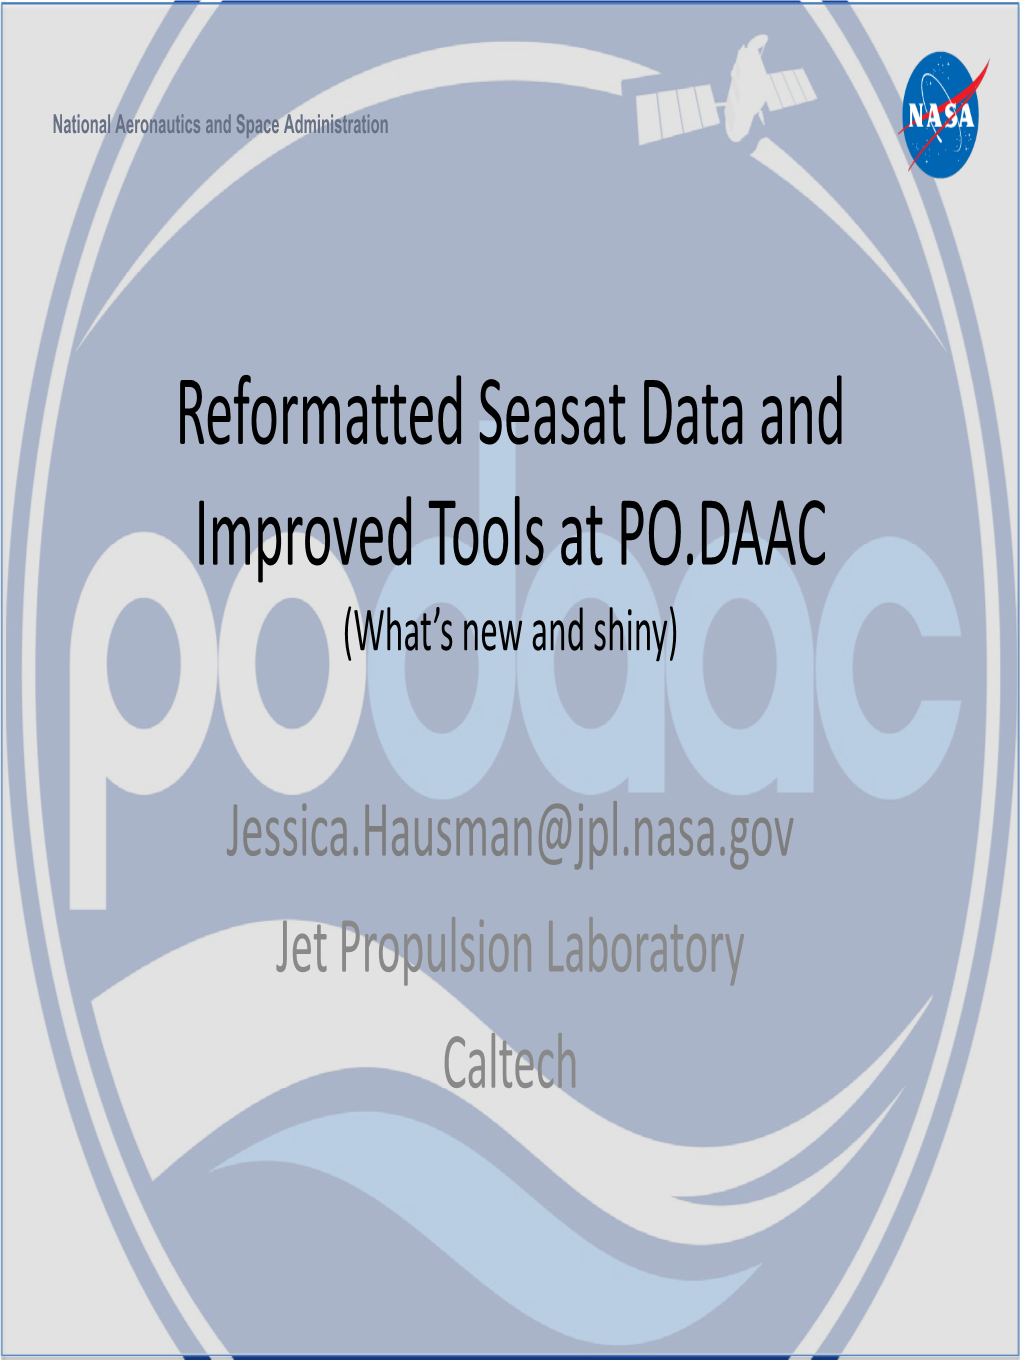 Reformatted Seasat Data and Improved Tols at PO.DAAC